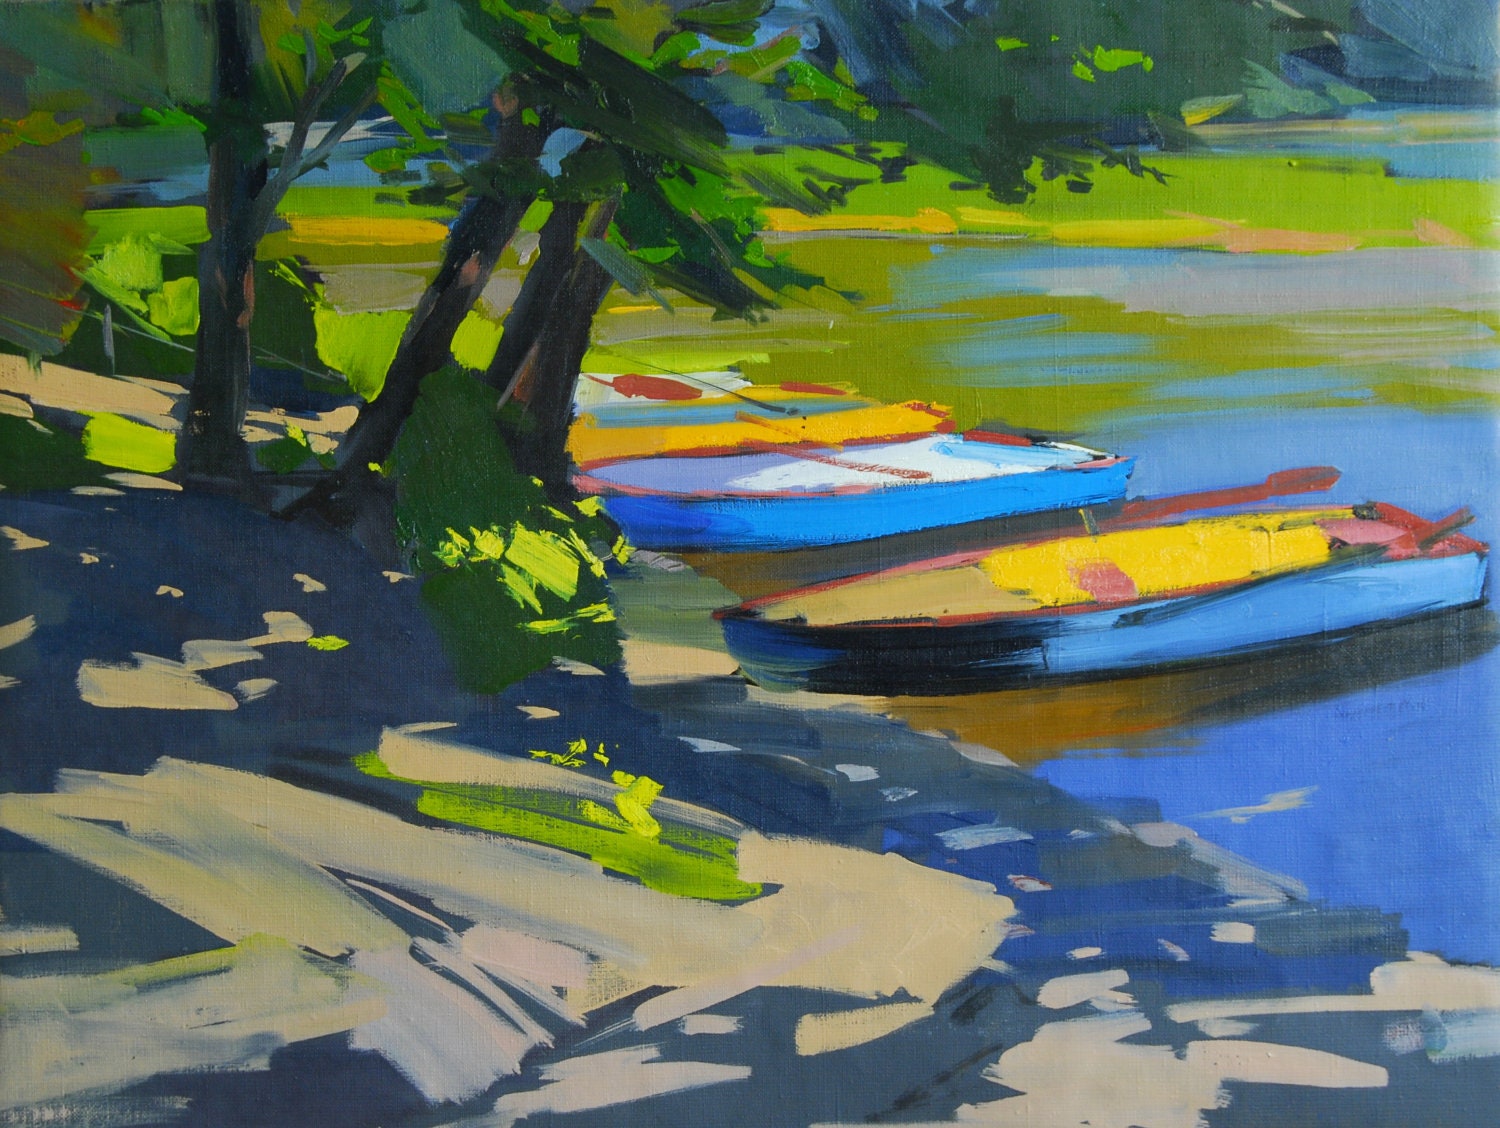 Abstract Landscape Blue Painting - Trees Boats Water Summer - Nature Painting -Modern Painting by Yuri Pysar